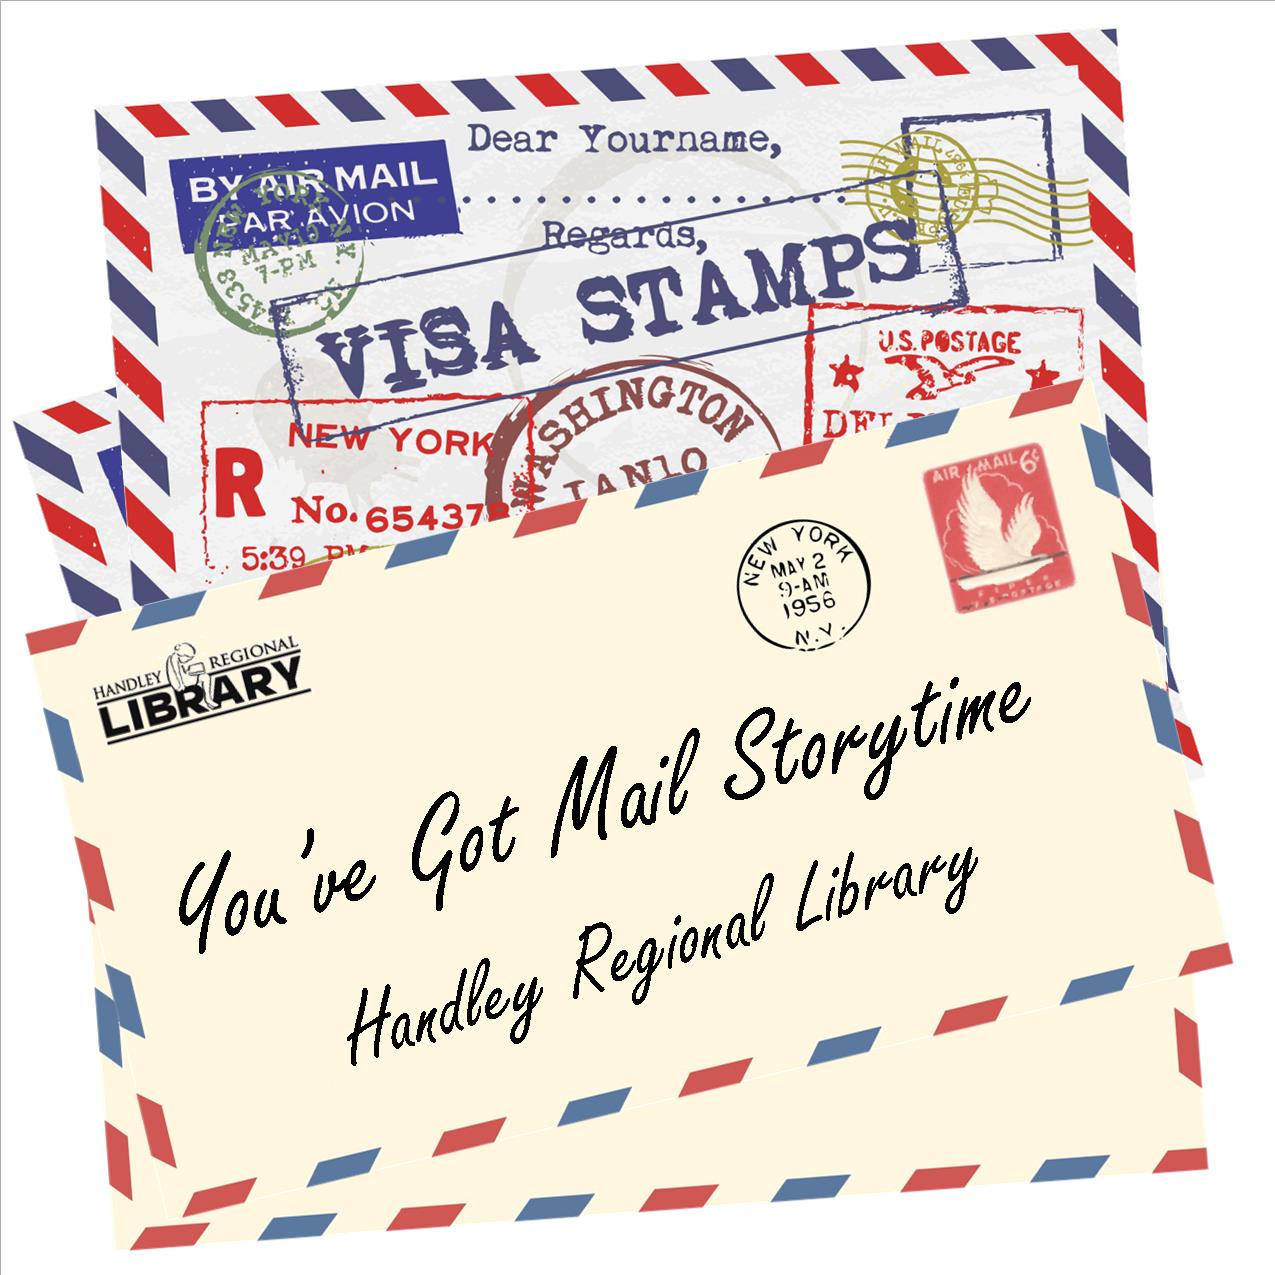 https://youthscope.files.wordpress.com/2018/01/letters-and-mail-storytime-graphic.jpg